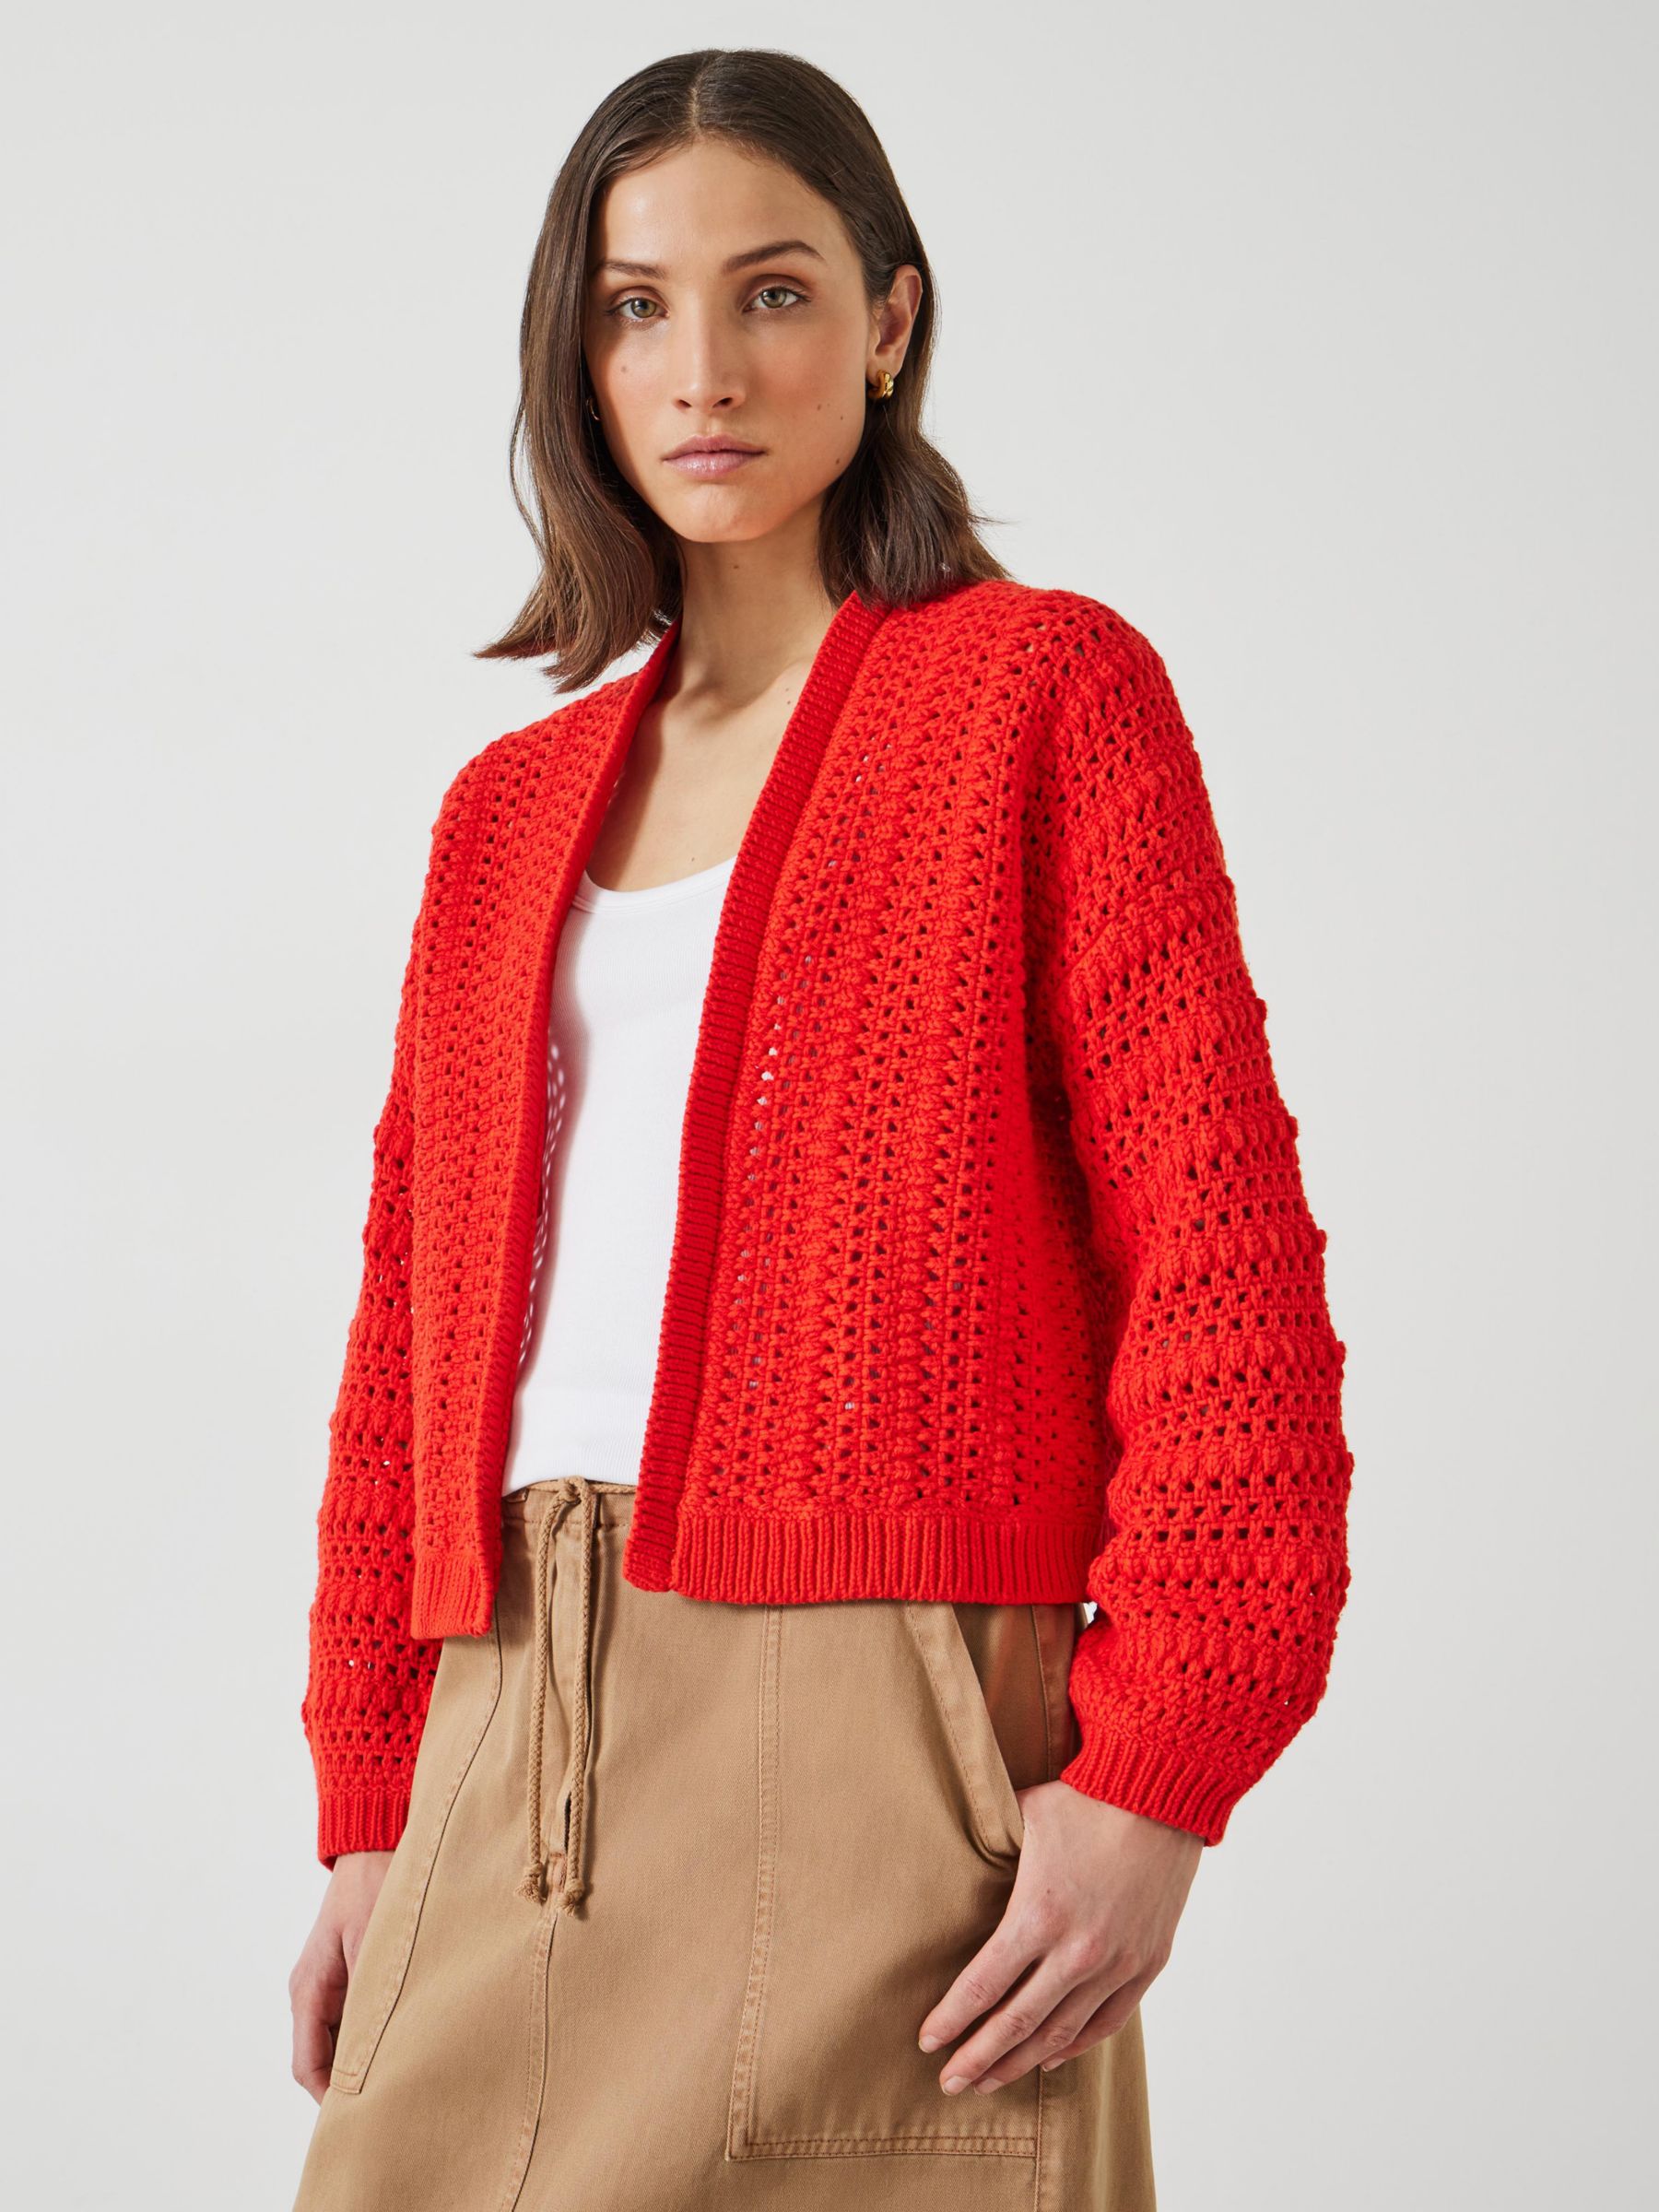 HUSH Pixie Knitted Edge Cardigan, Fiery Red